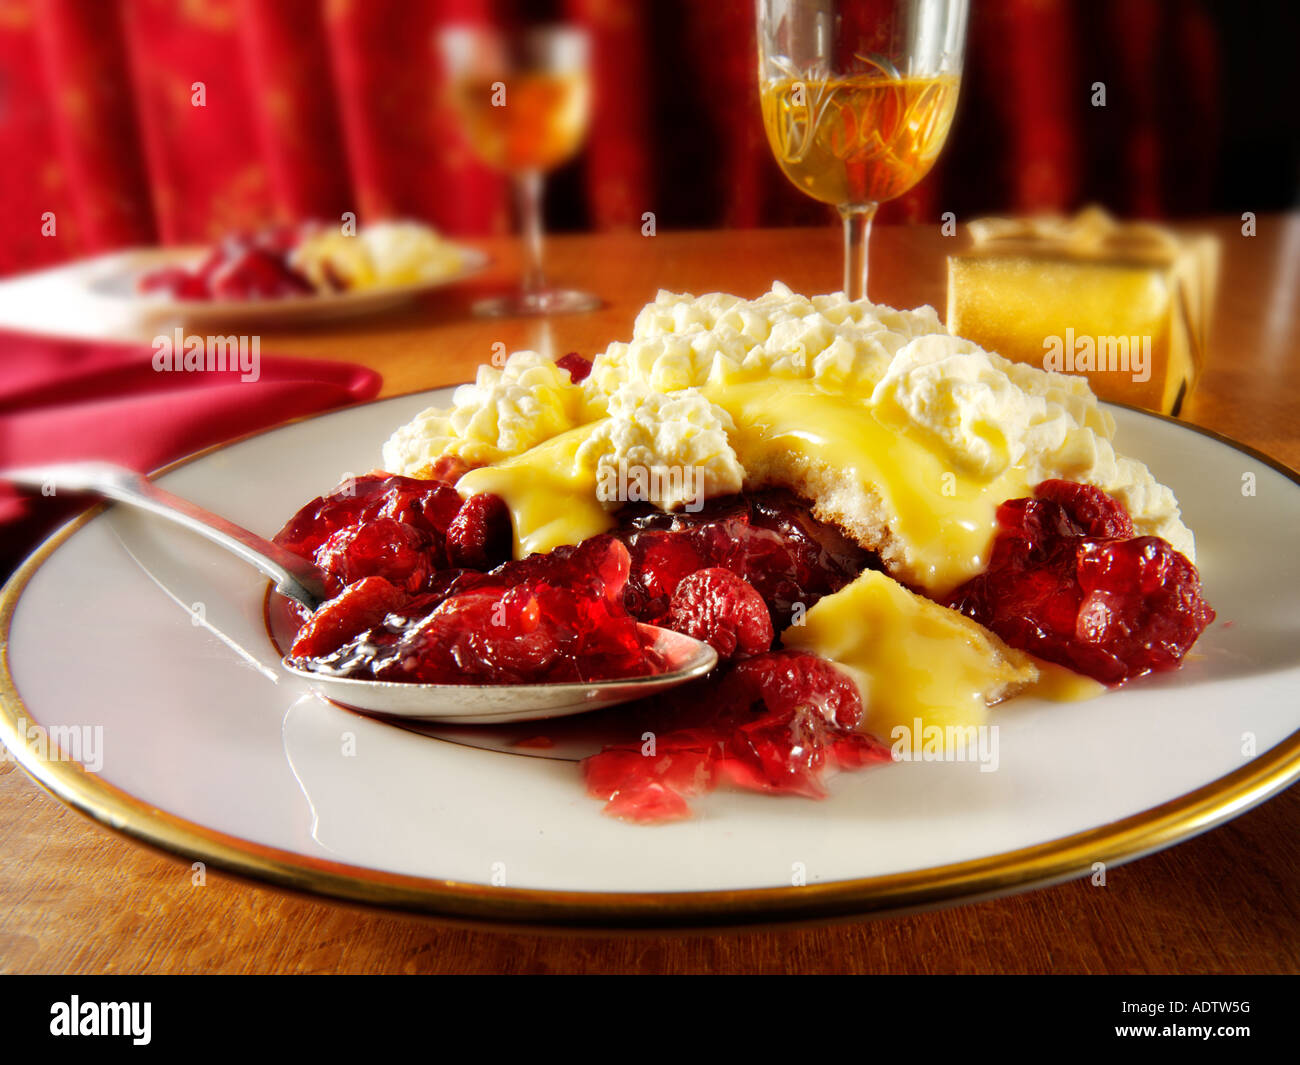 Traditional Sherry trifle dessert Stock Photo